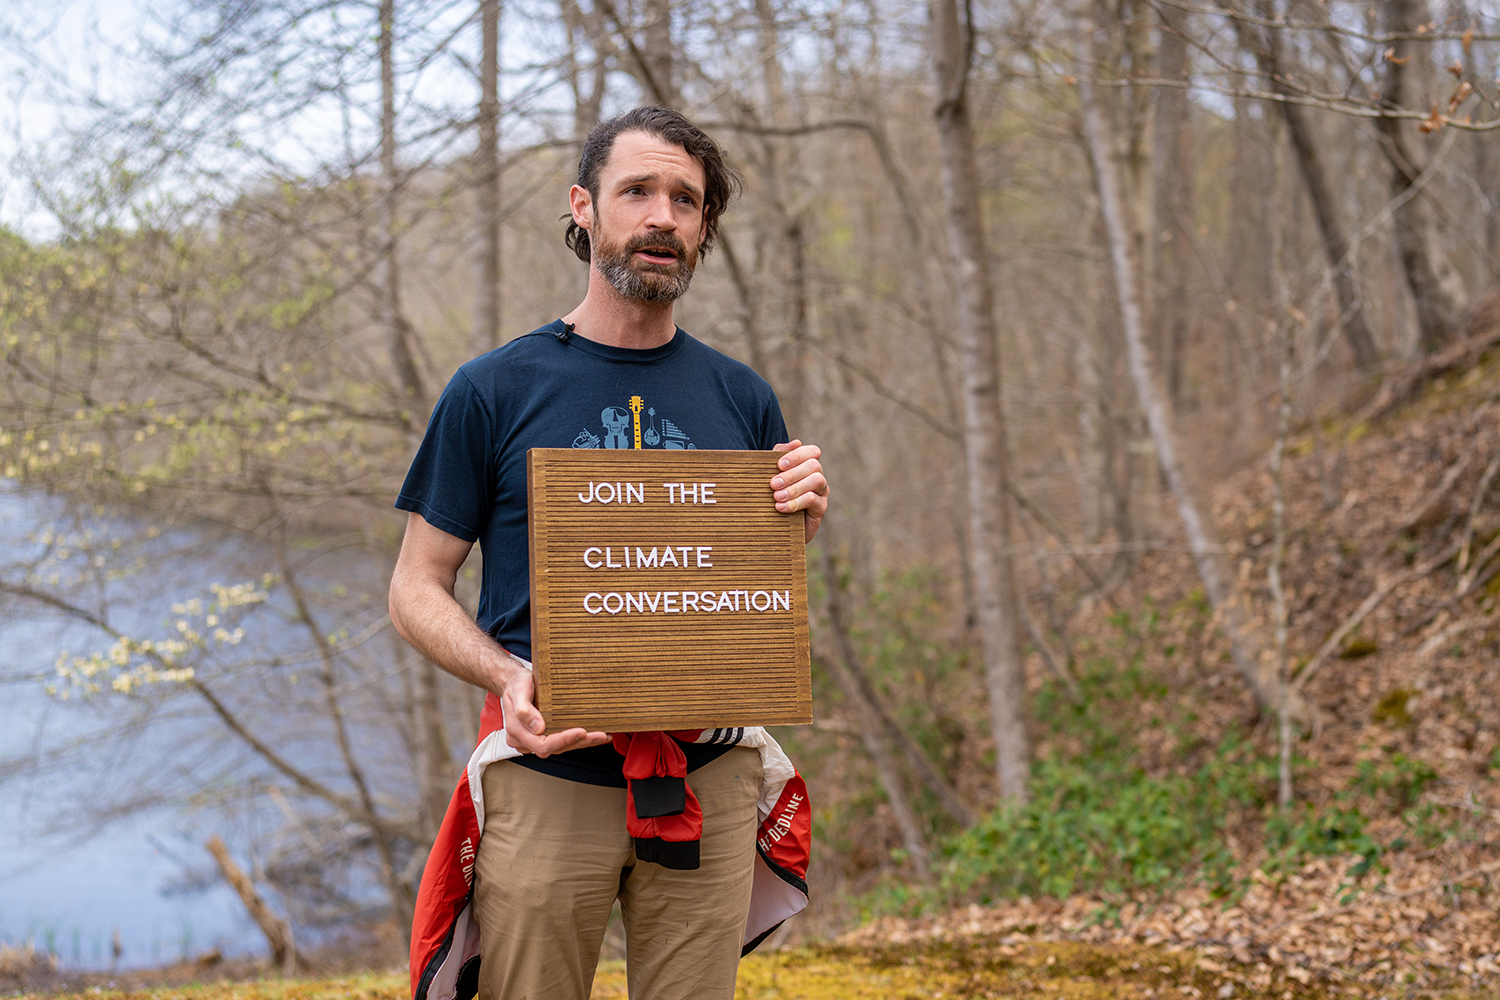 a man stands with trees behind, presenting a wooden sign that says "Join the climate conversation"